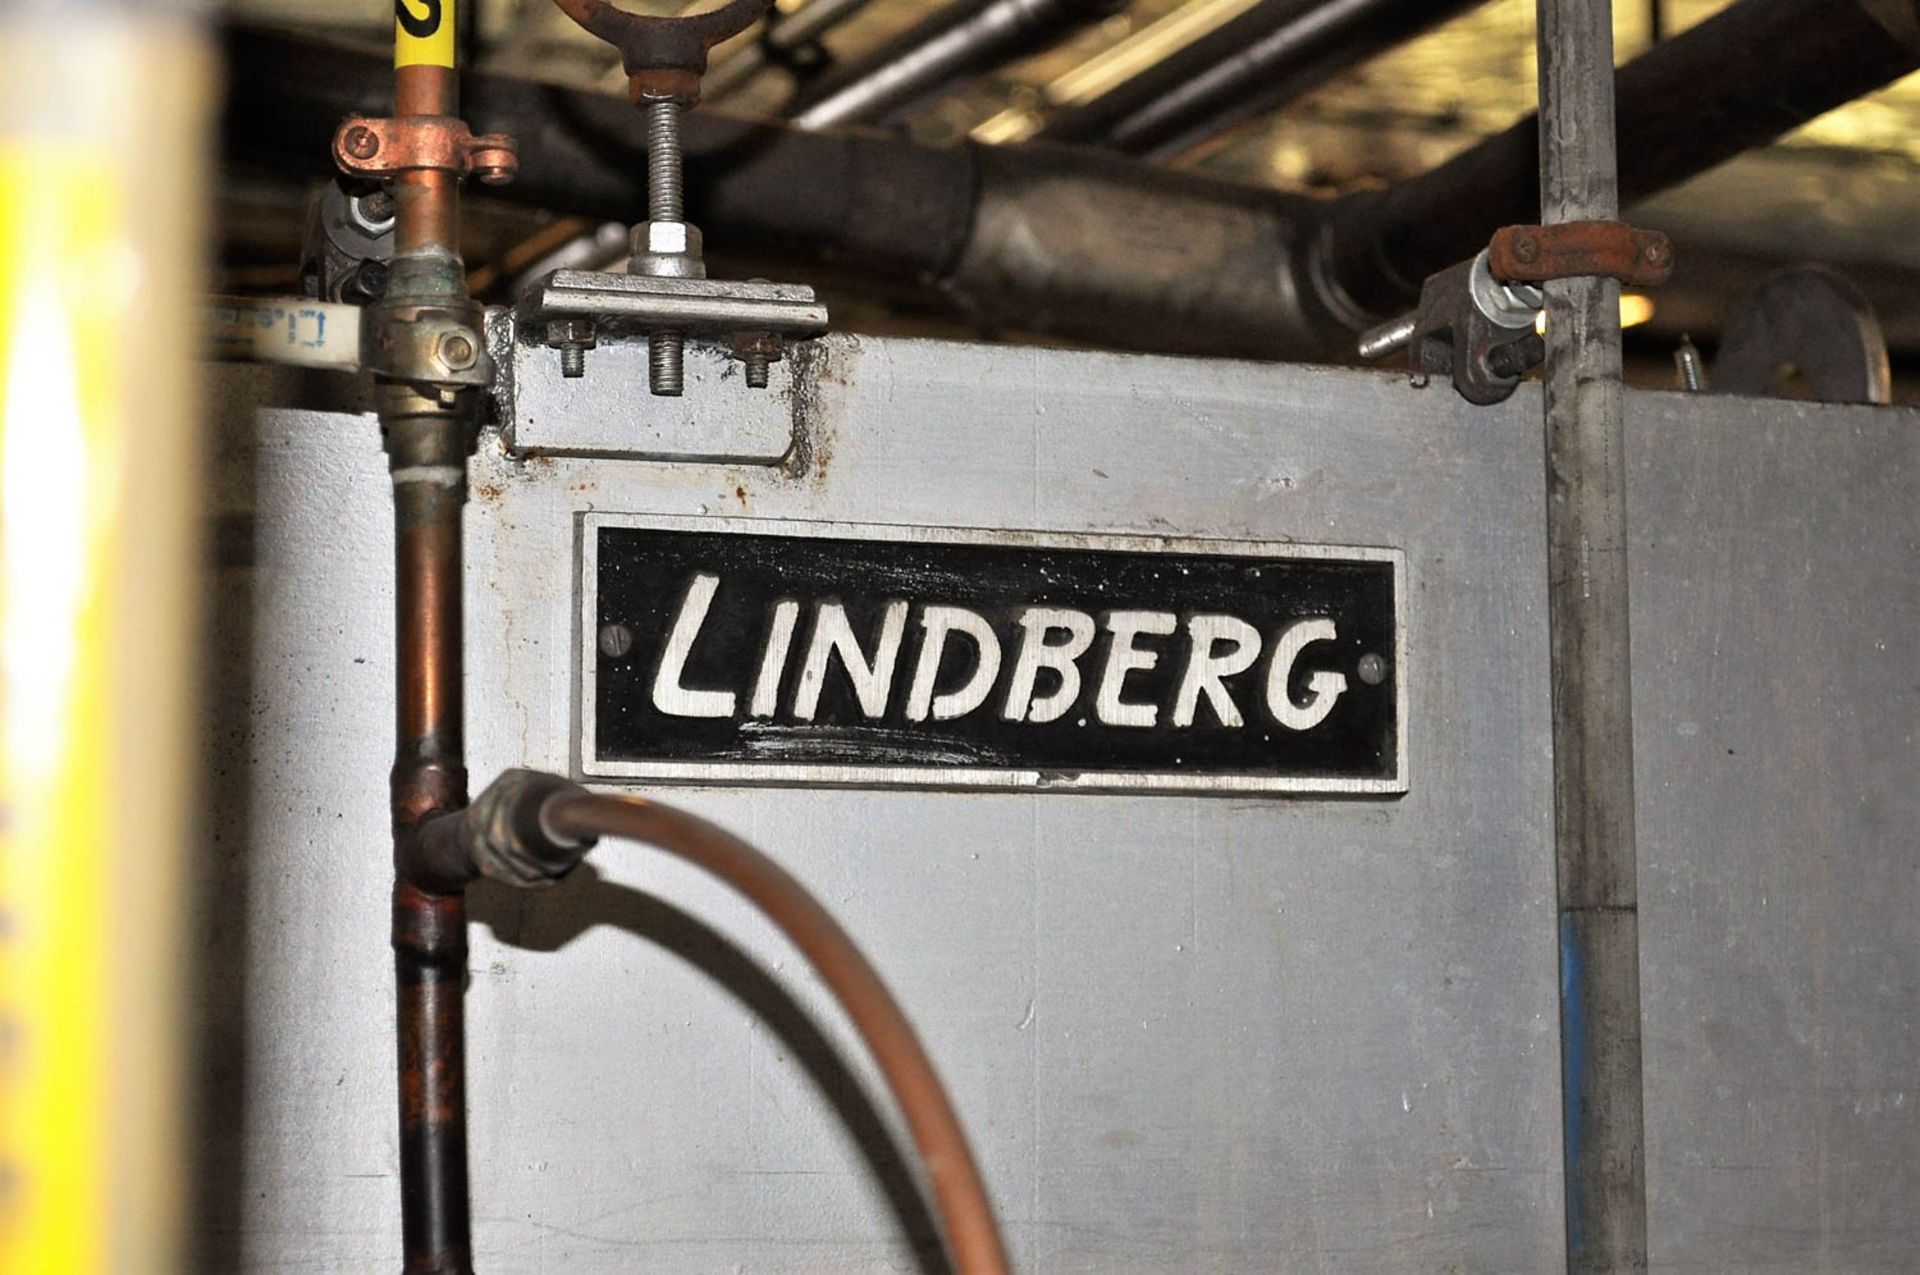 7" LINDBERG PASS THRU BELT FURNACE, 3-ZONE, WITH DIGITAL TEMPERATURE CONTROLS, S/N: N/A - Image 2 of 9